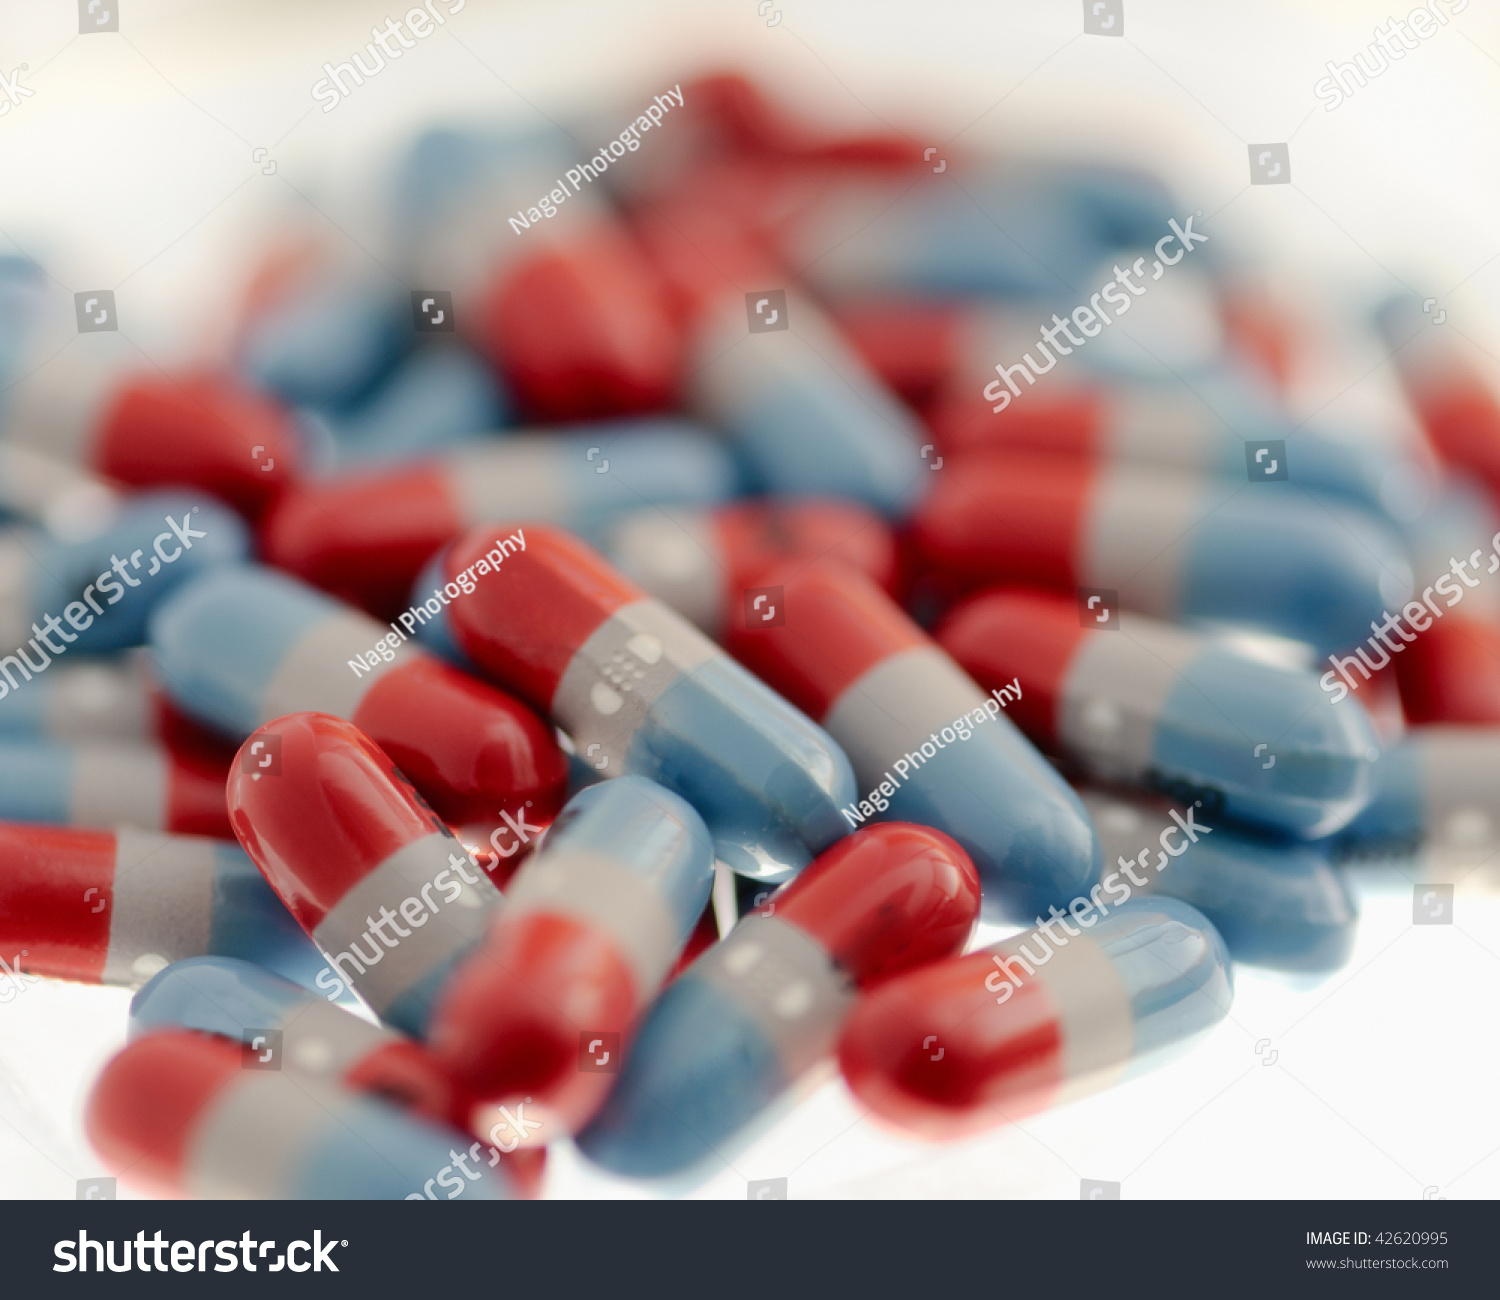 All 105+ Images what pill is red white and blue Completed